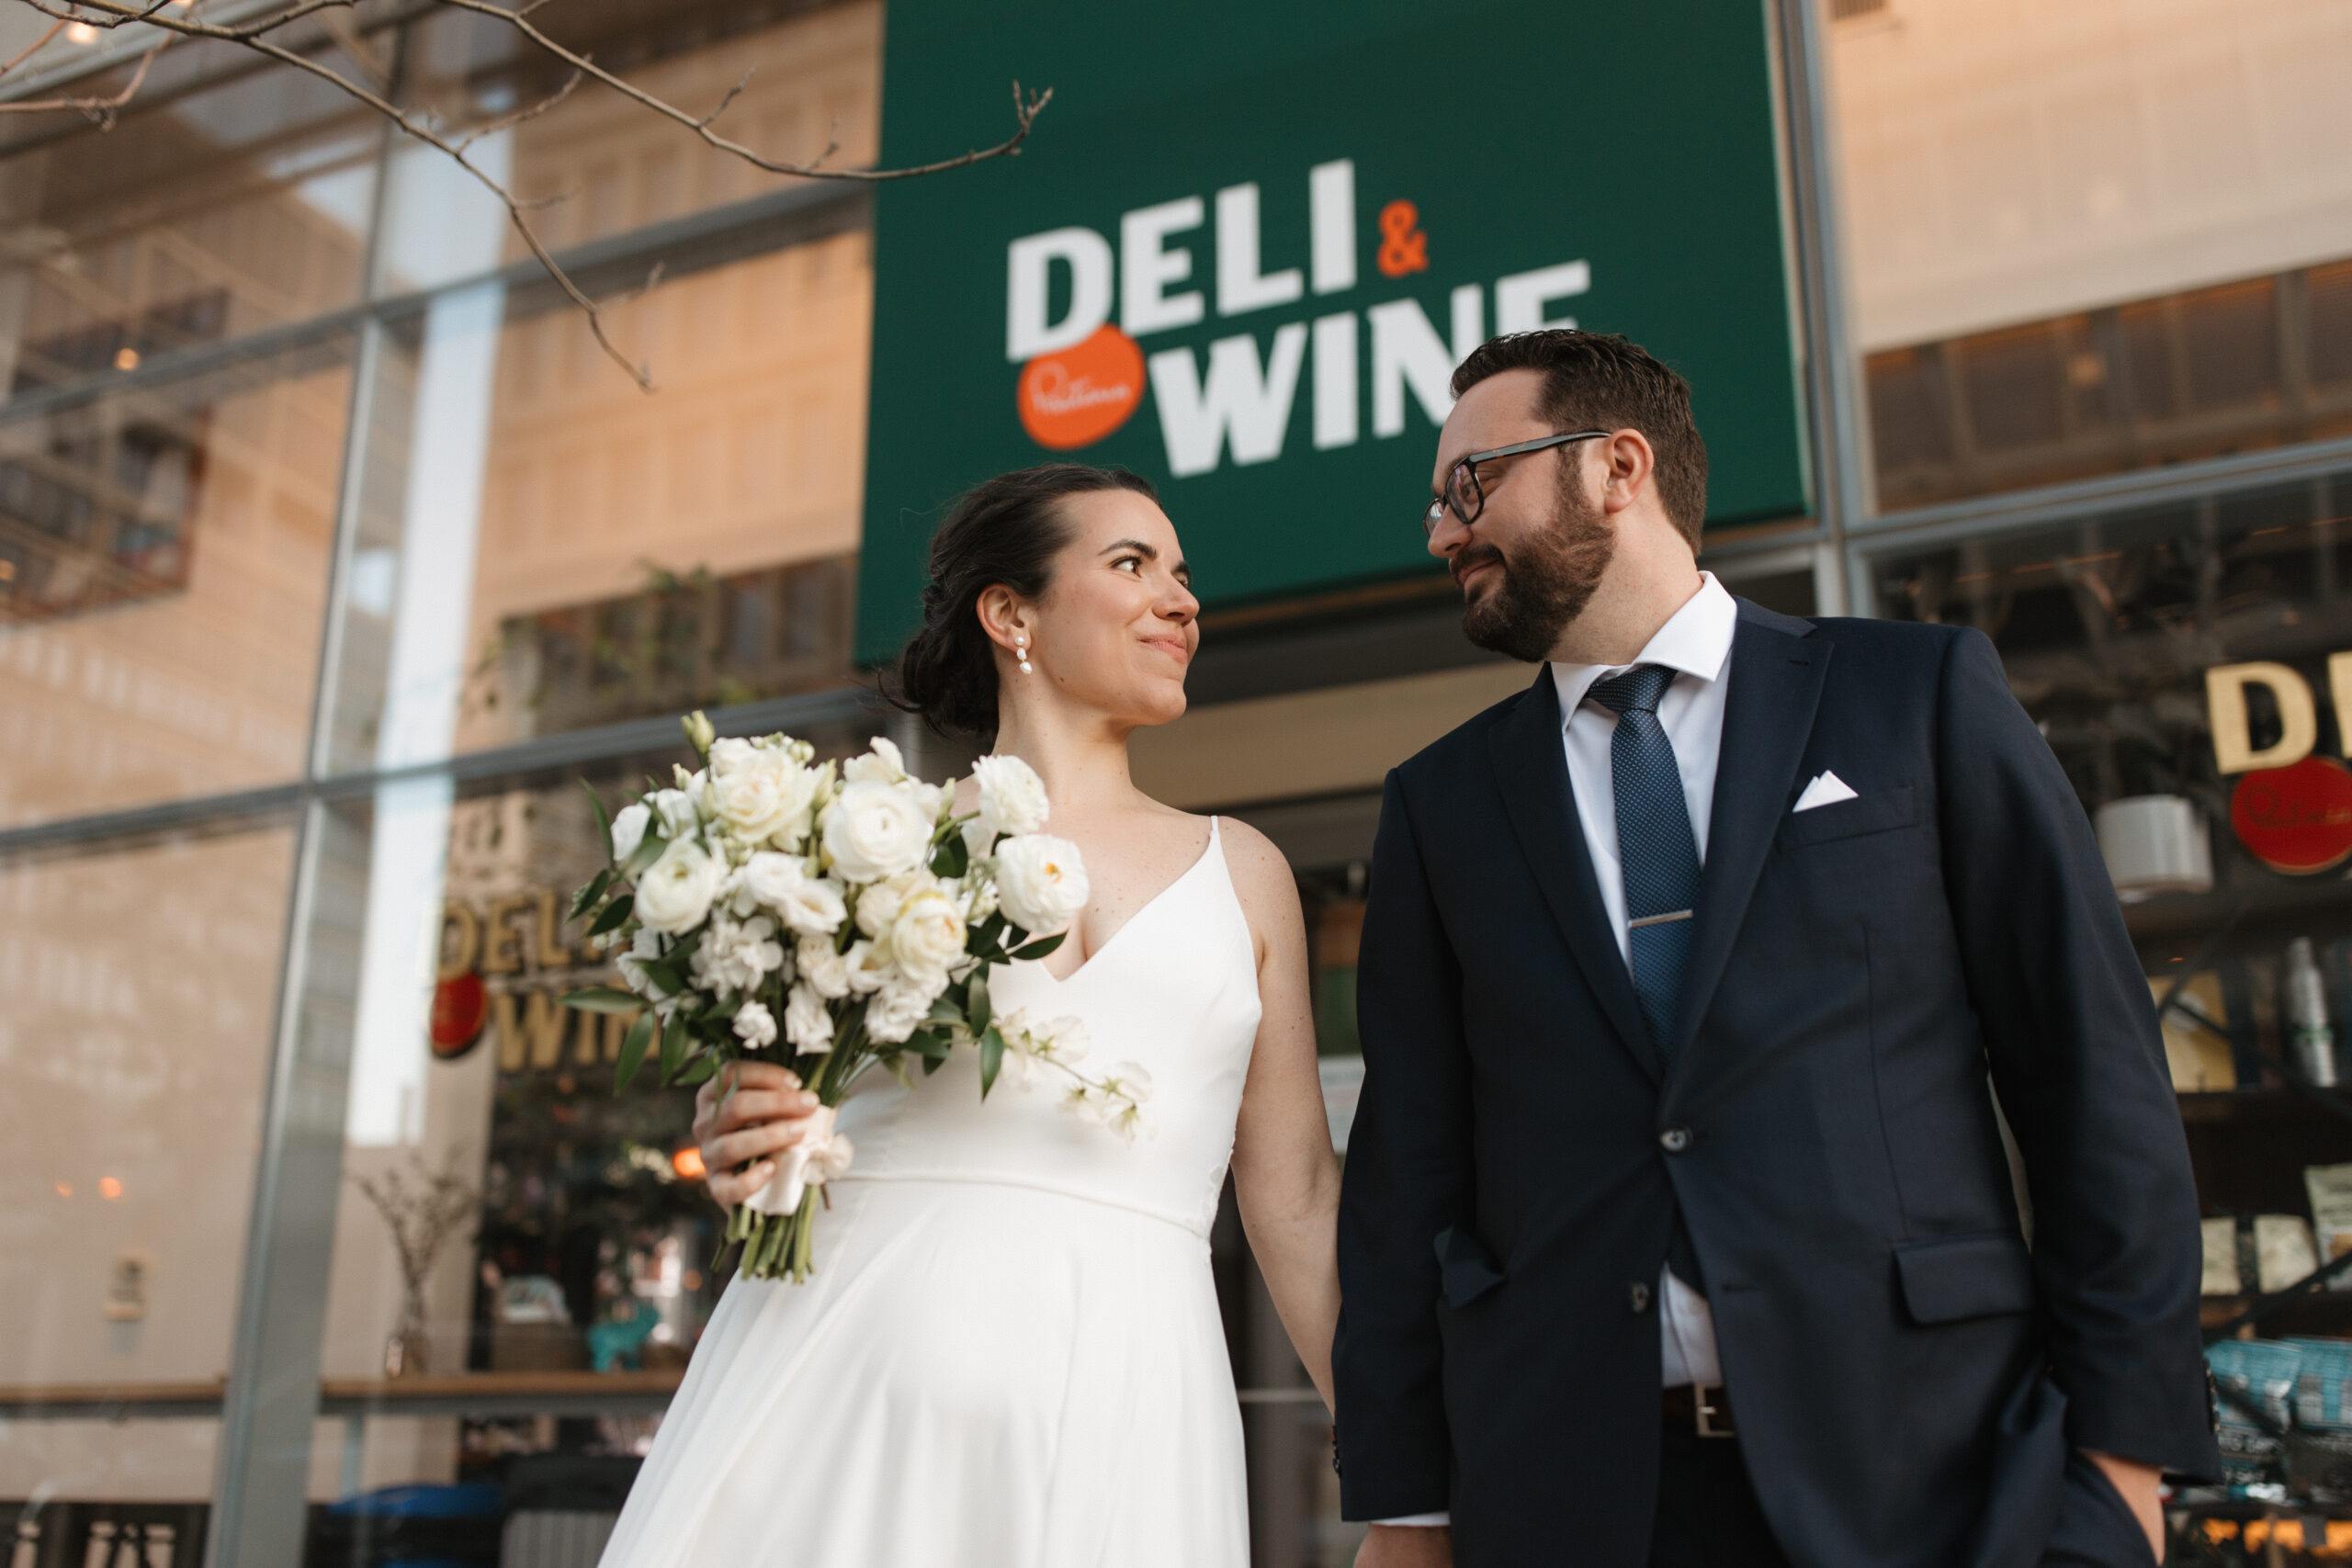 Bride with flowers and groom stand in front of Pastaria Deli & Wine wedding